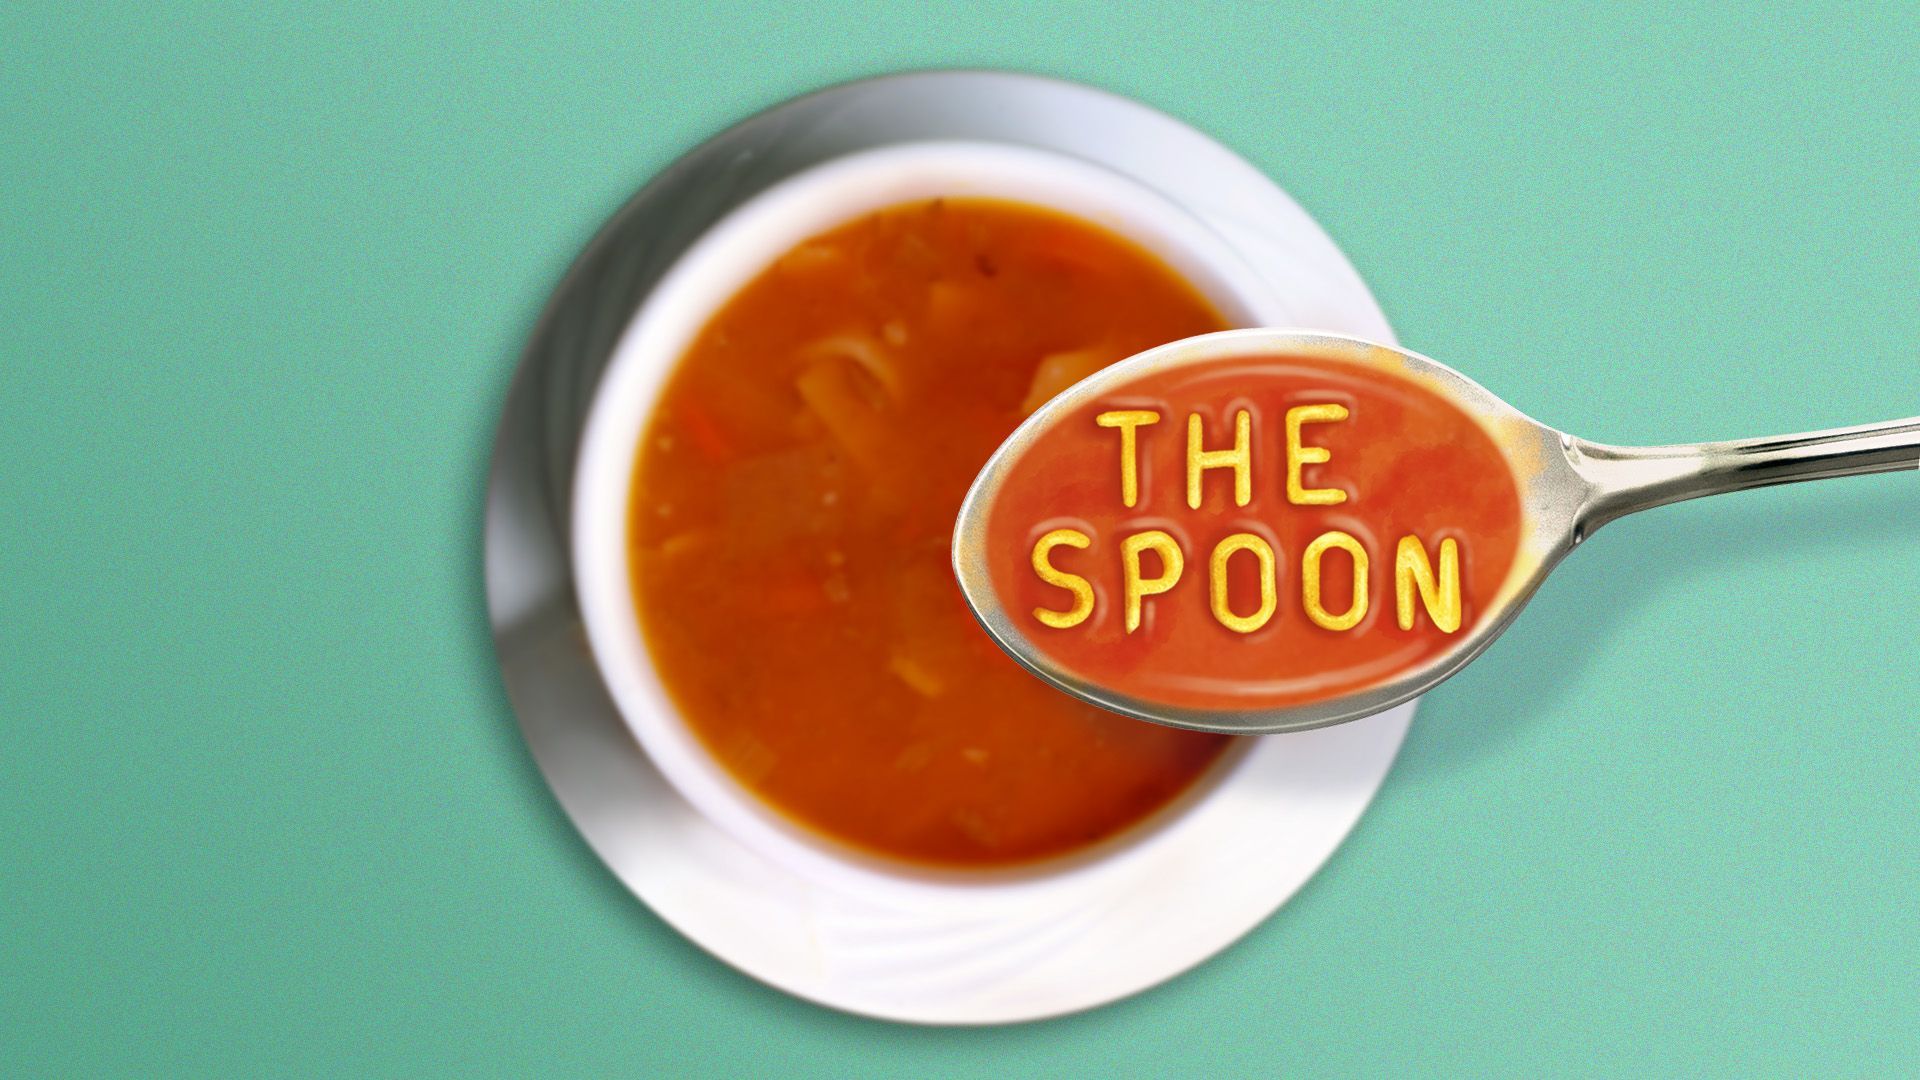 Illustration of a spoon of alphabet soup spelling out "The Spoon" 